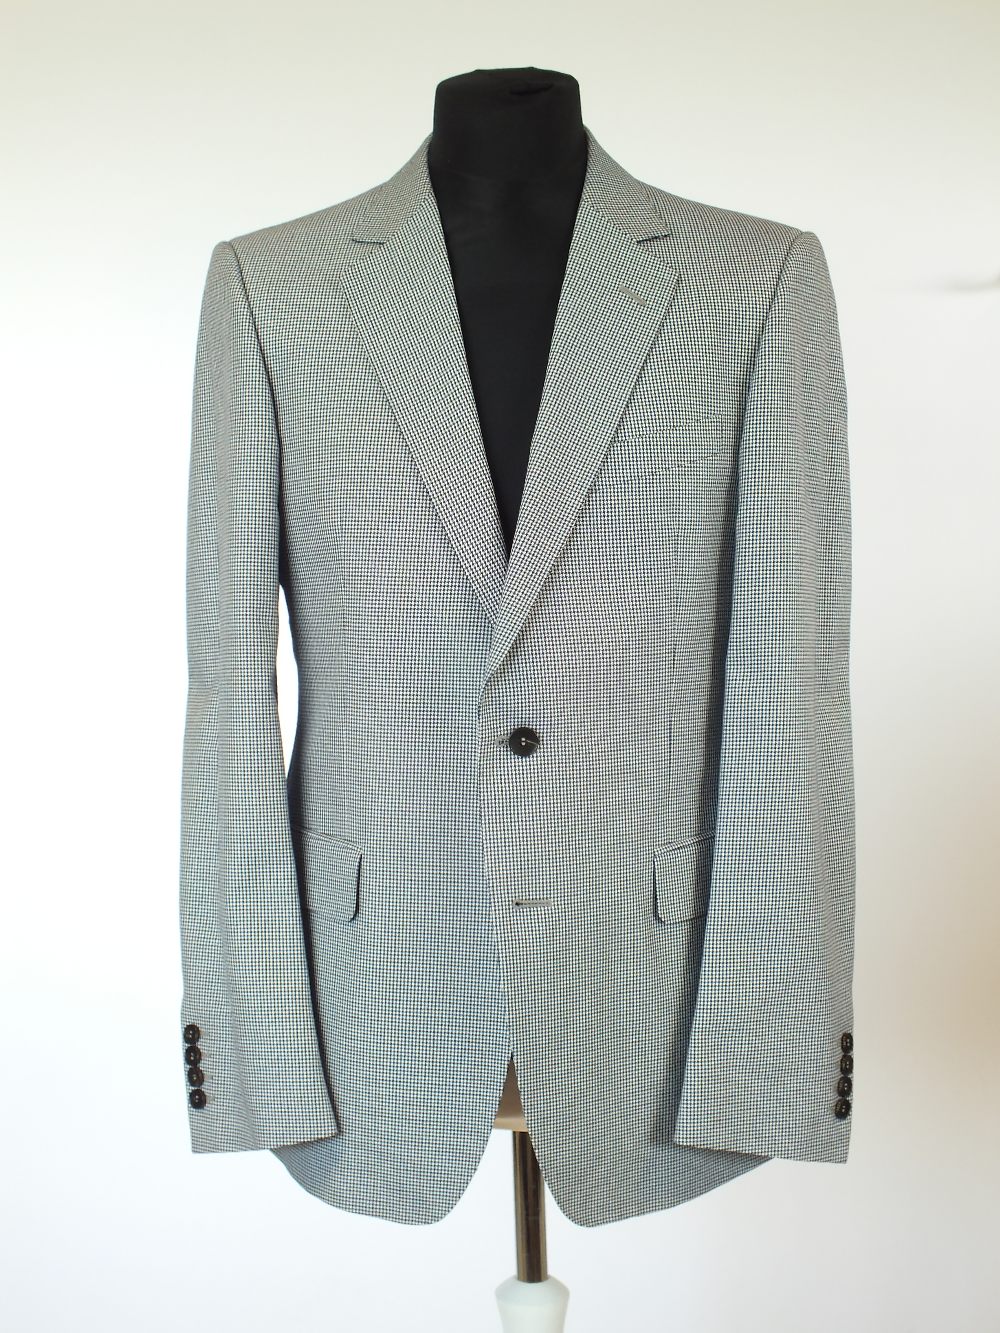 A Gucci jacket, blue and black dog tooth check, Gucci logo to blue/black lining, single vent,